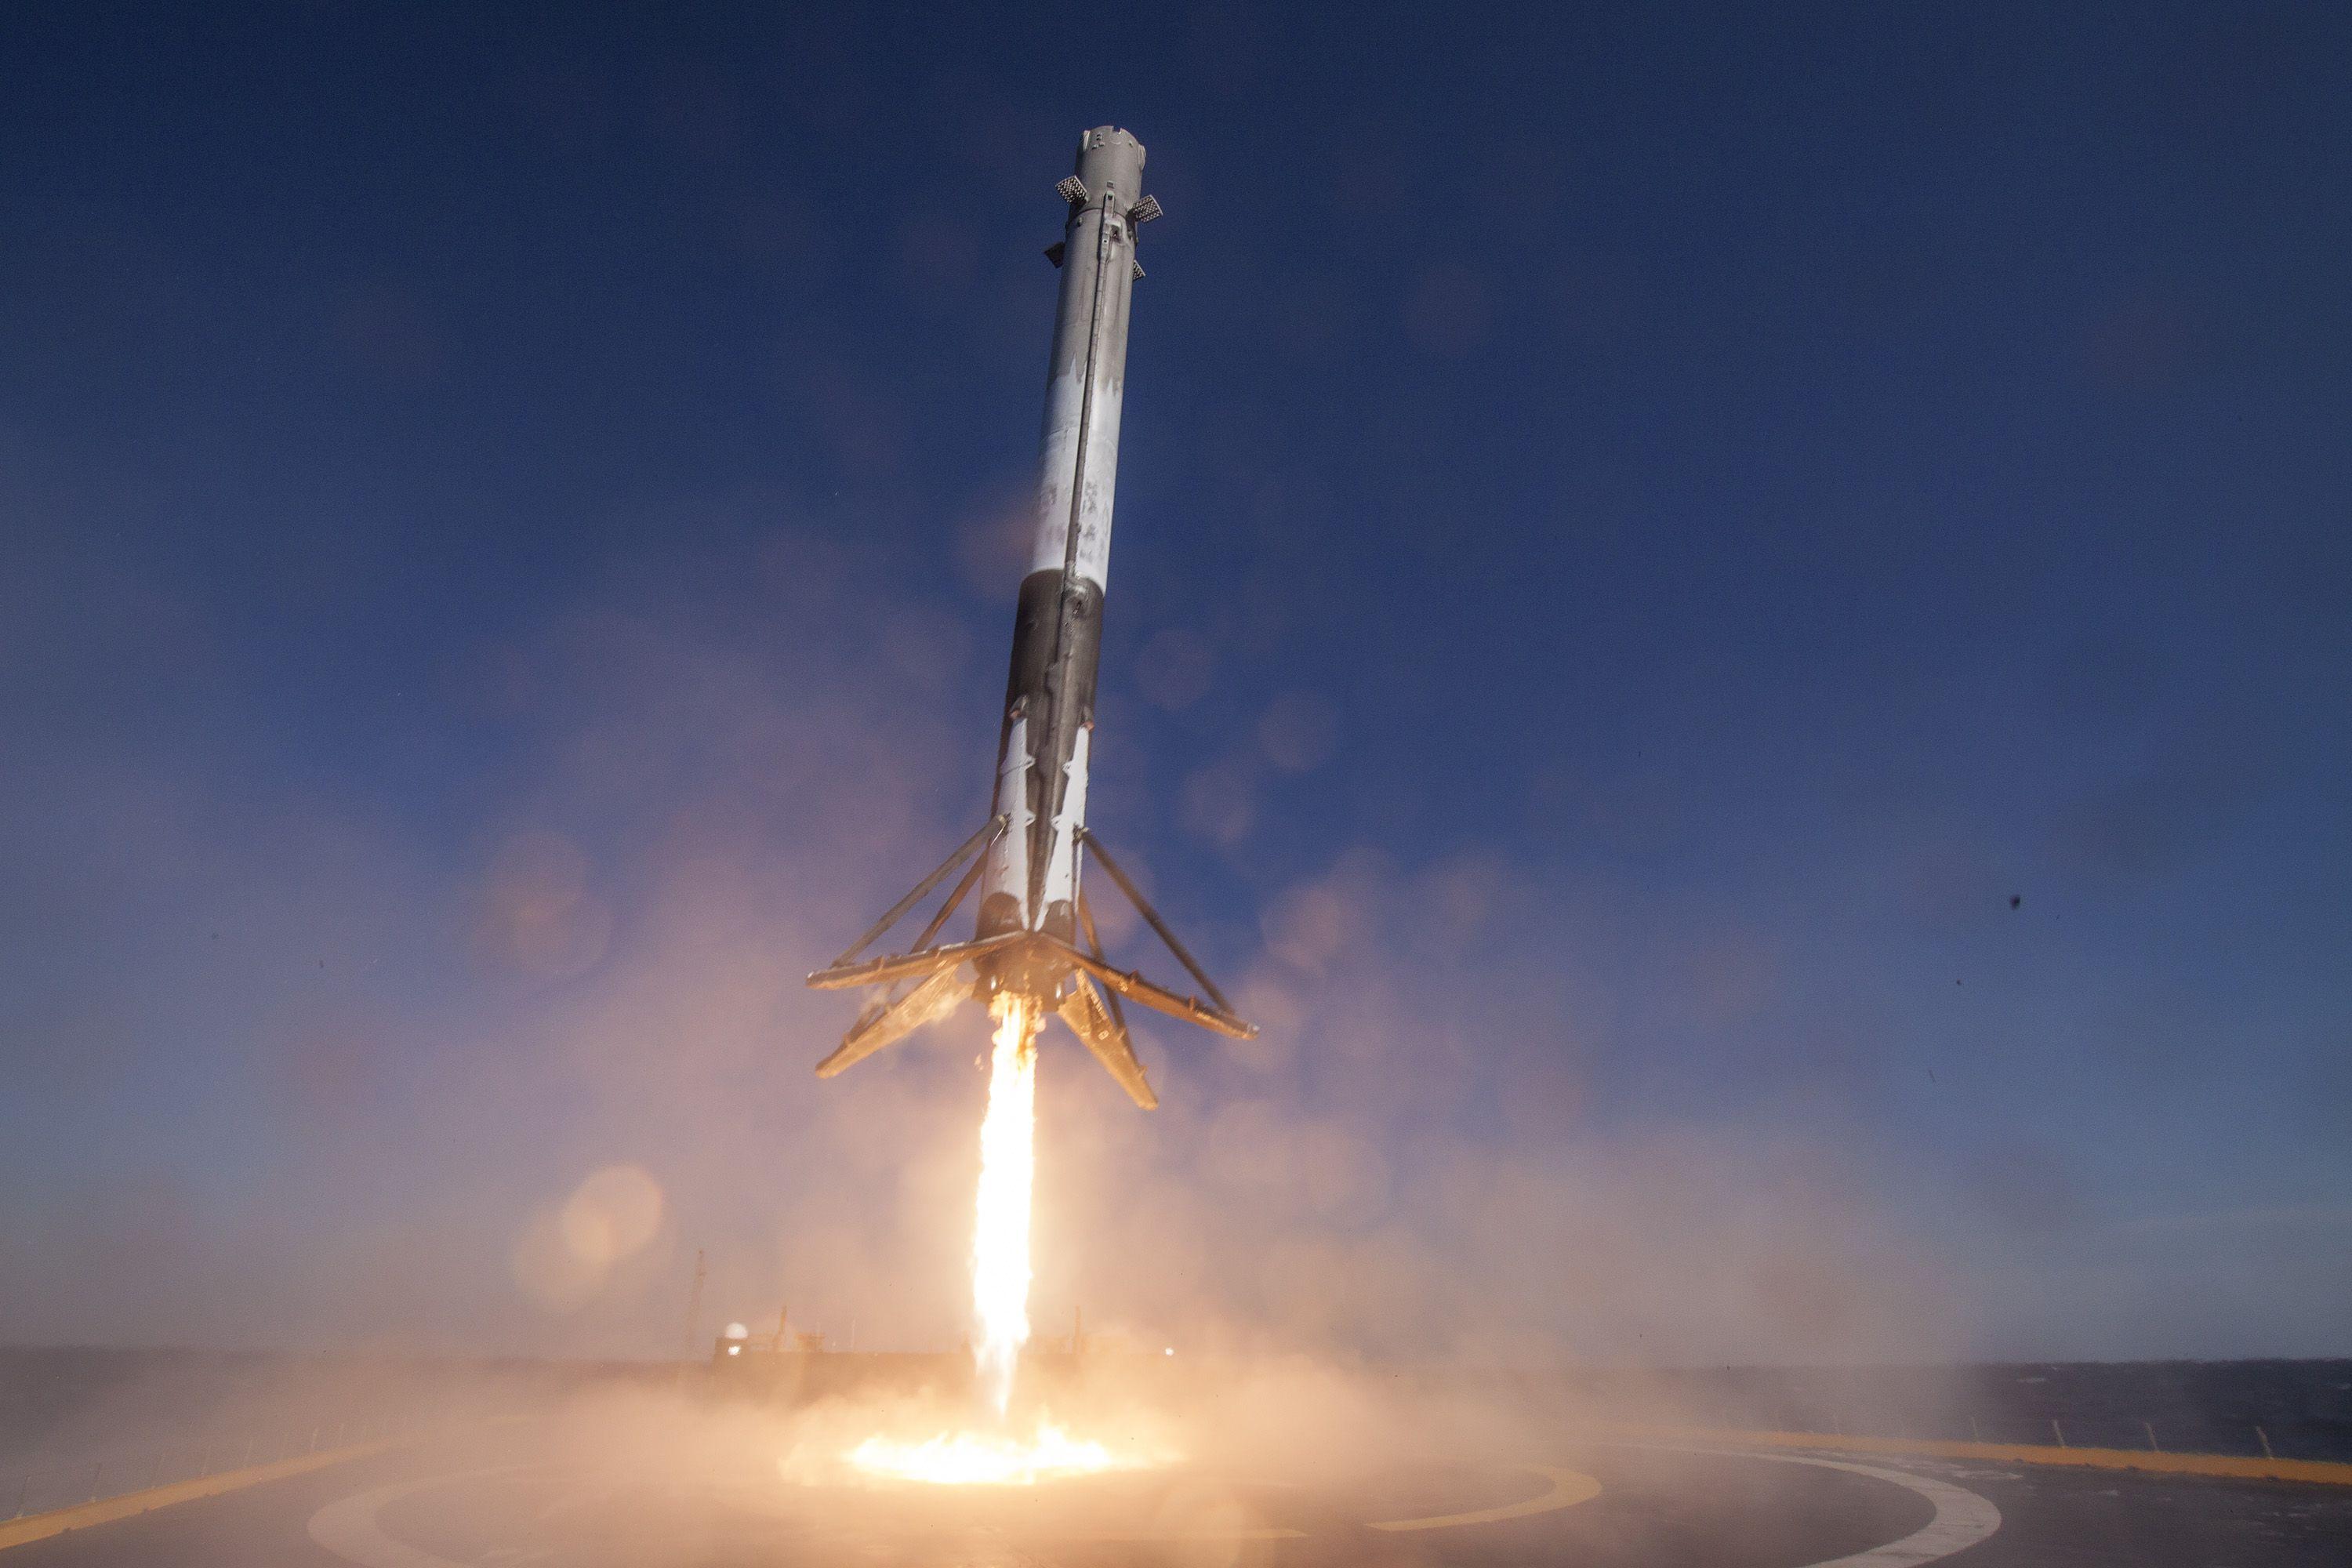 SpaceX Falcon Rocket Logo - 94 percent of SpaceX's Falcon 9 rocket launches have been successful ...